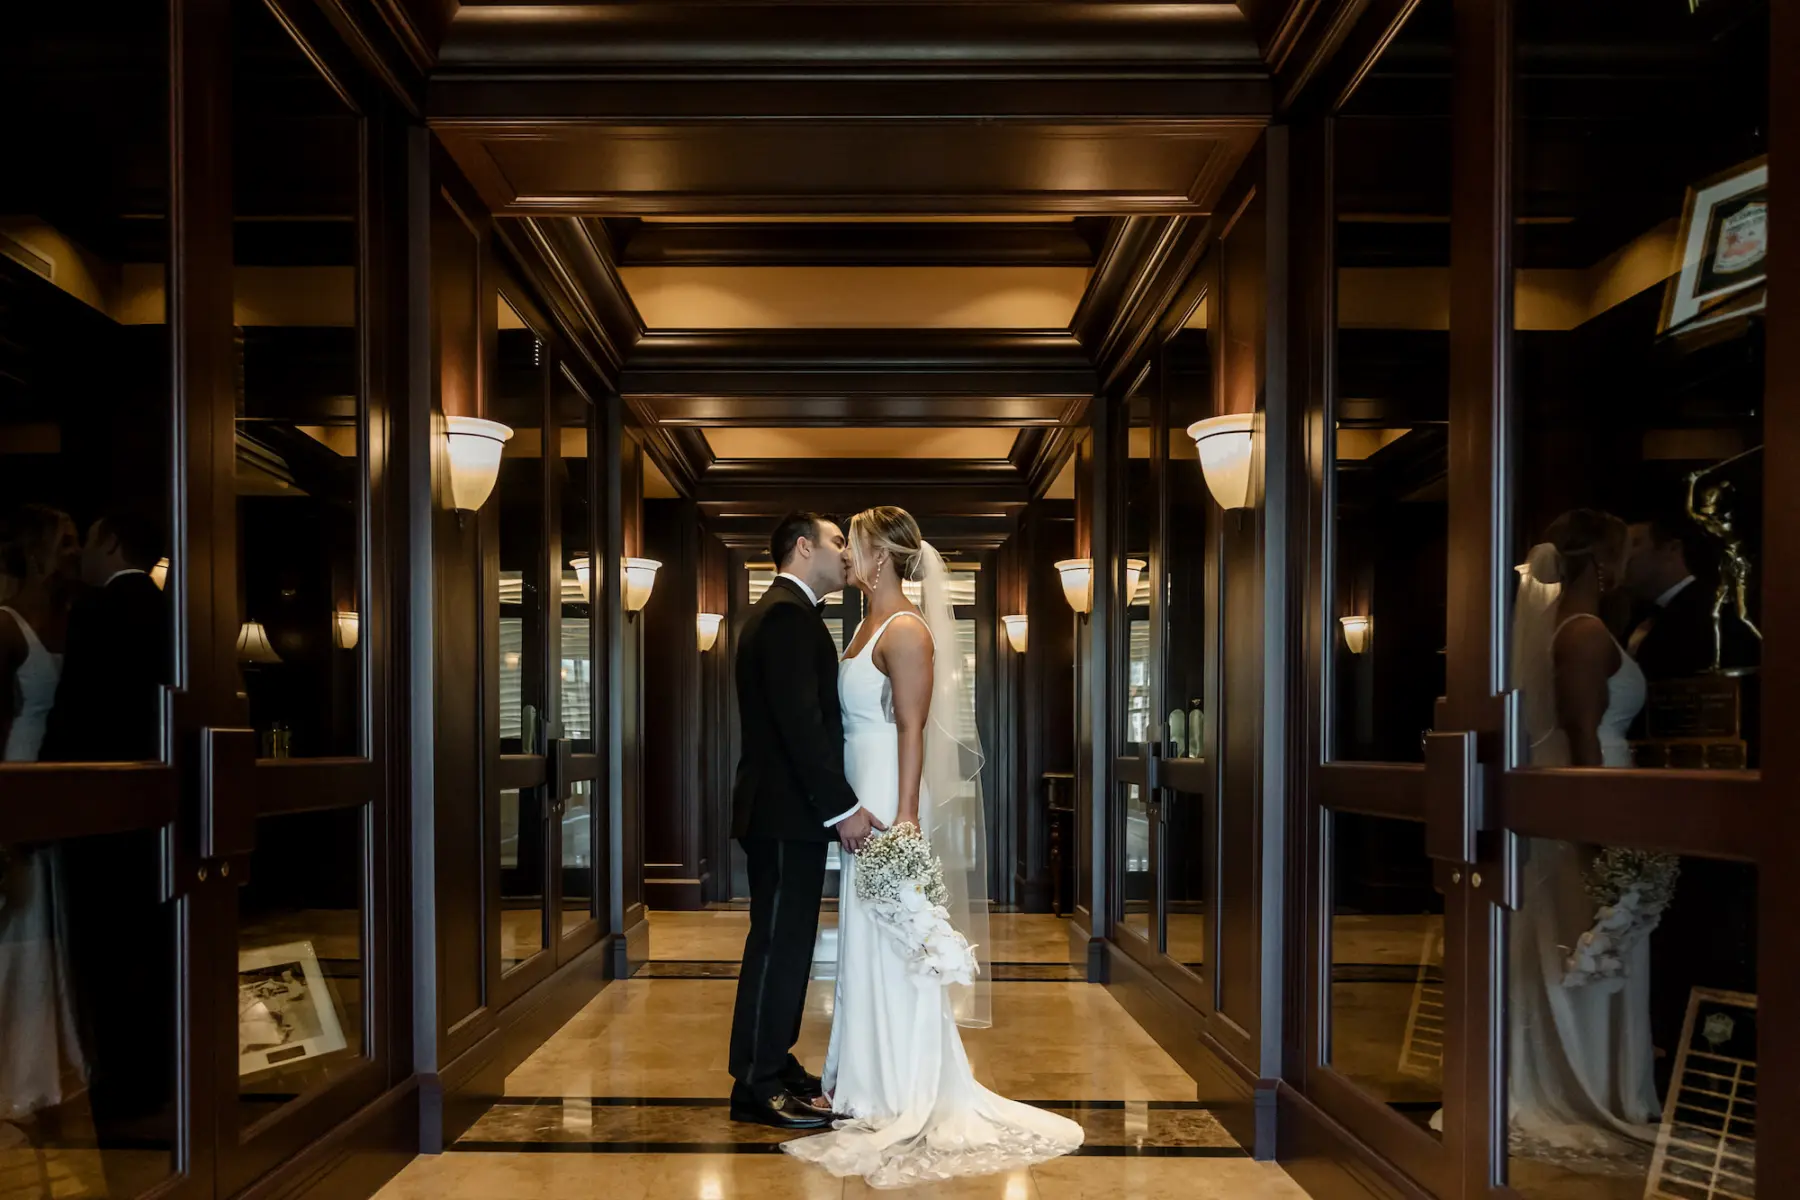 Romantic Bride and Groom Wedding Portrait | South Tampa Venue Palma Ceia Golf and Country Club | Planner Oh My Occasions